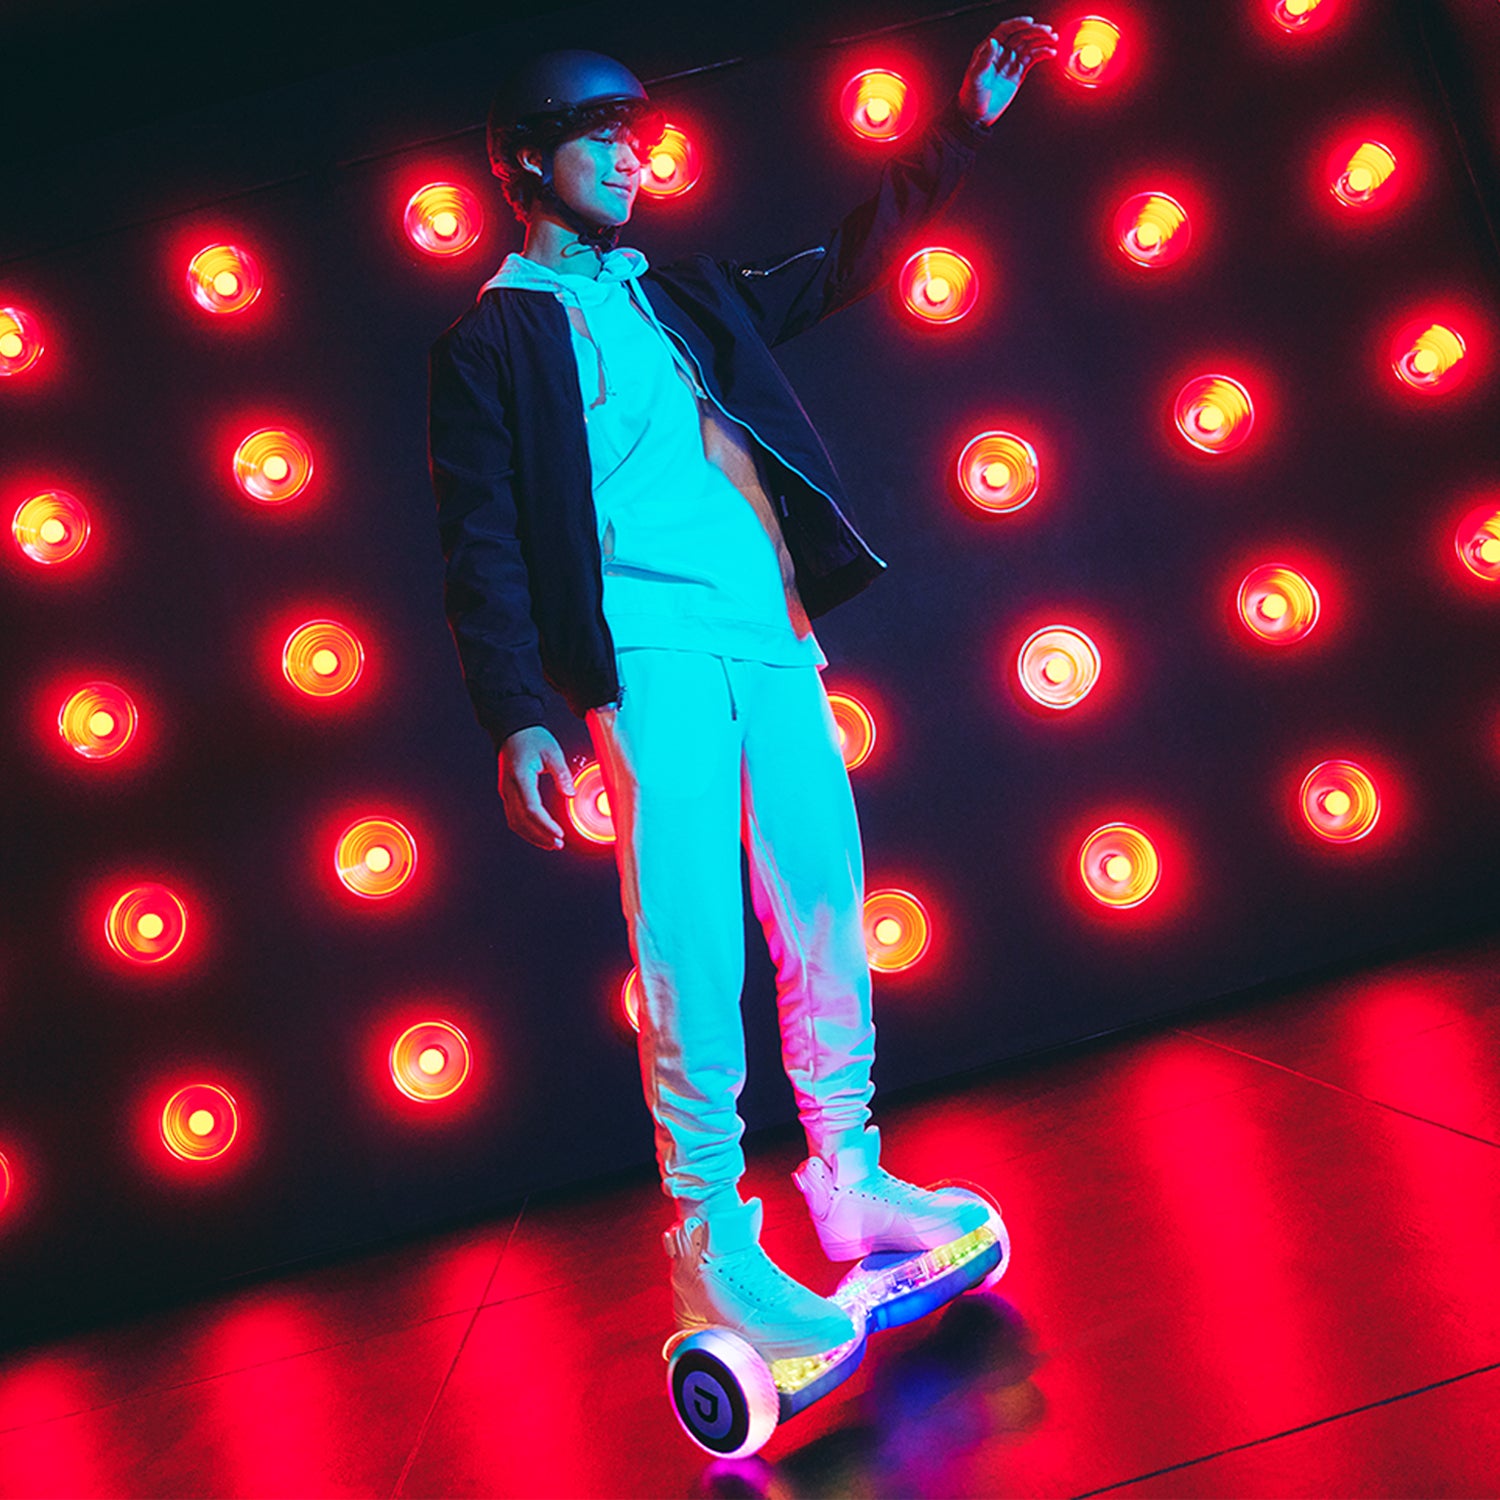 guy in a helmet riding the lit up pixel hoverboard